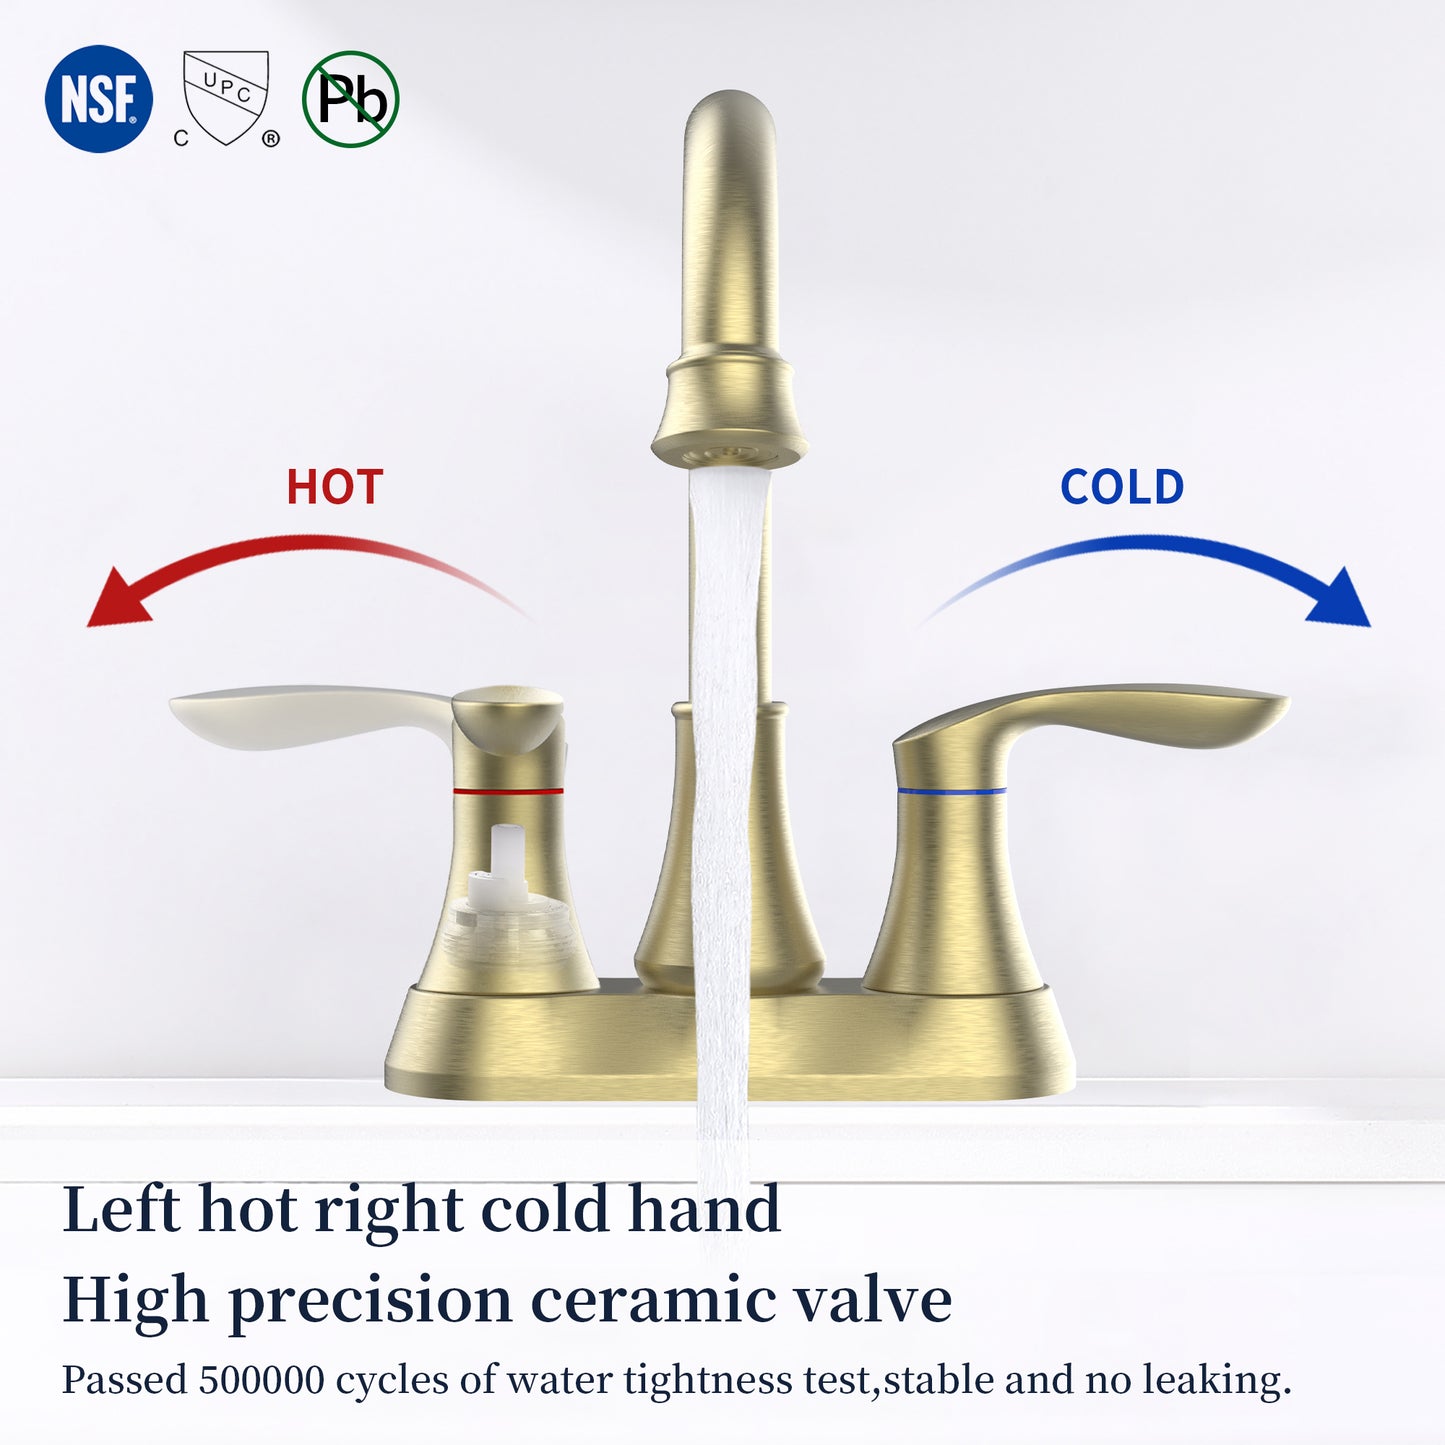 Brushed Gold 2-Handle High Arc Vanity Sink Faucet